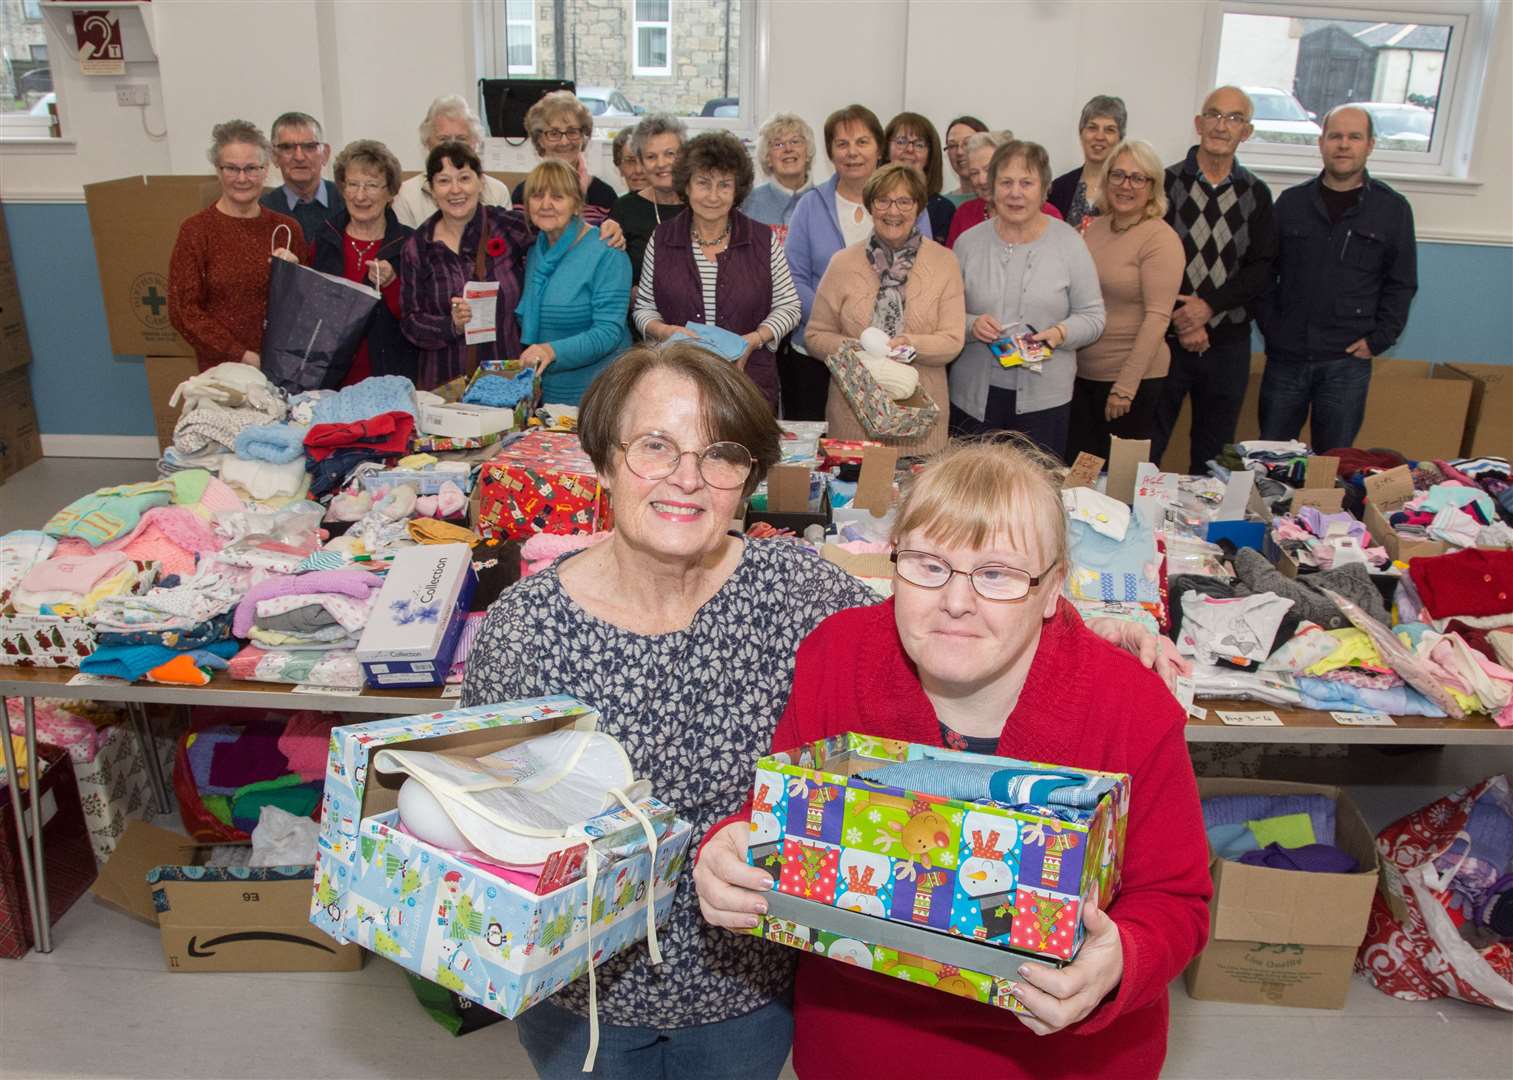 Getting cracking with the packing are Joan Thain (front left) and Lorna Cruickshank (front right) along with other Blysthwood volunteers. Picture: Becky Saunderson